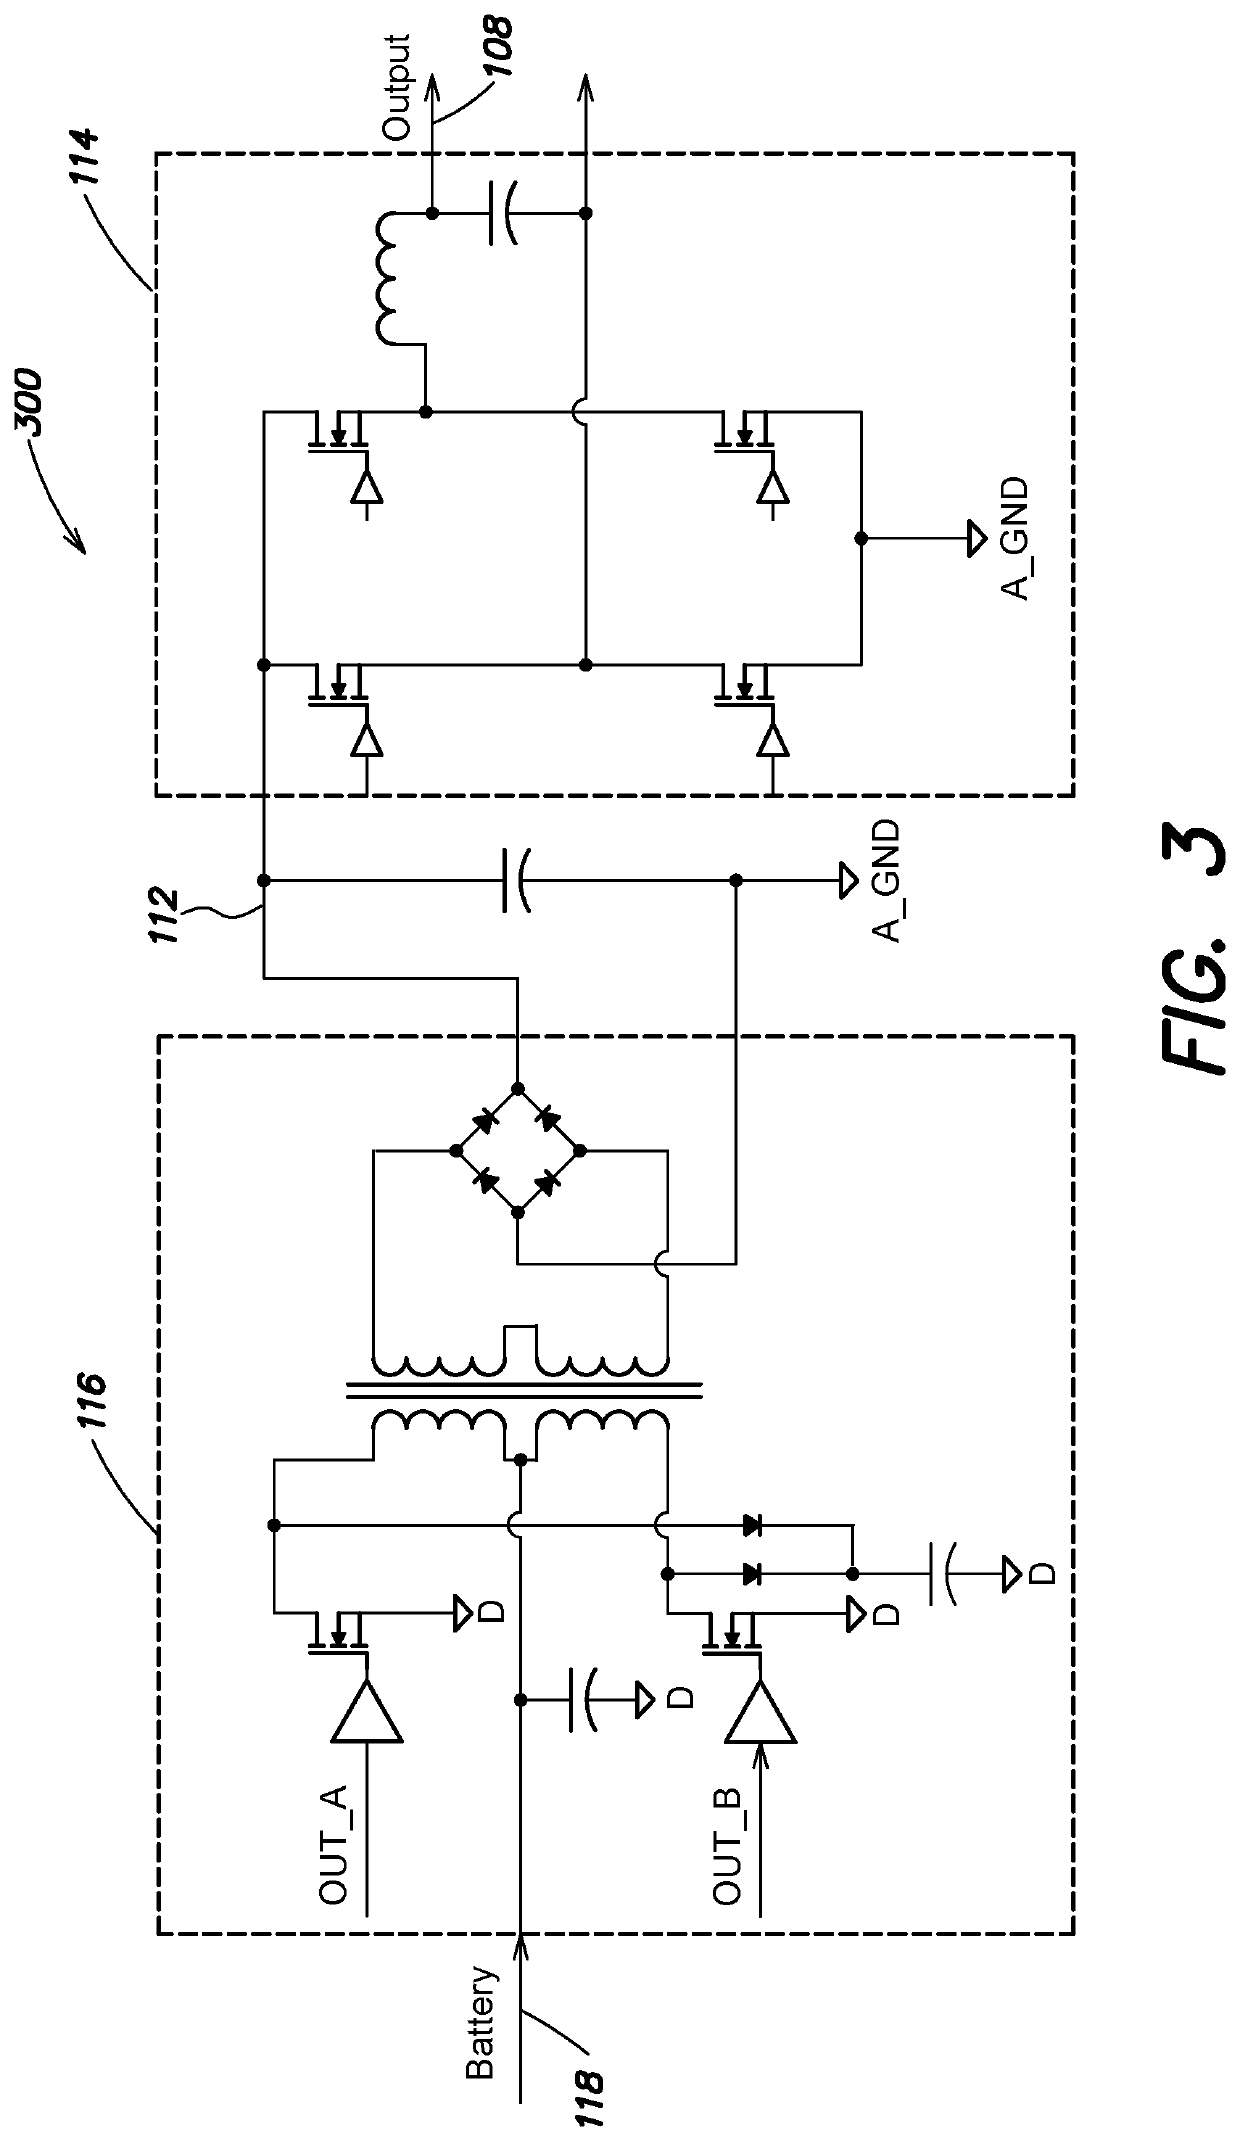 Inverter control strategy for a transient heavy load